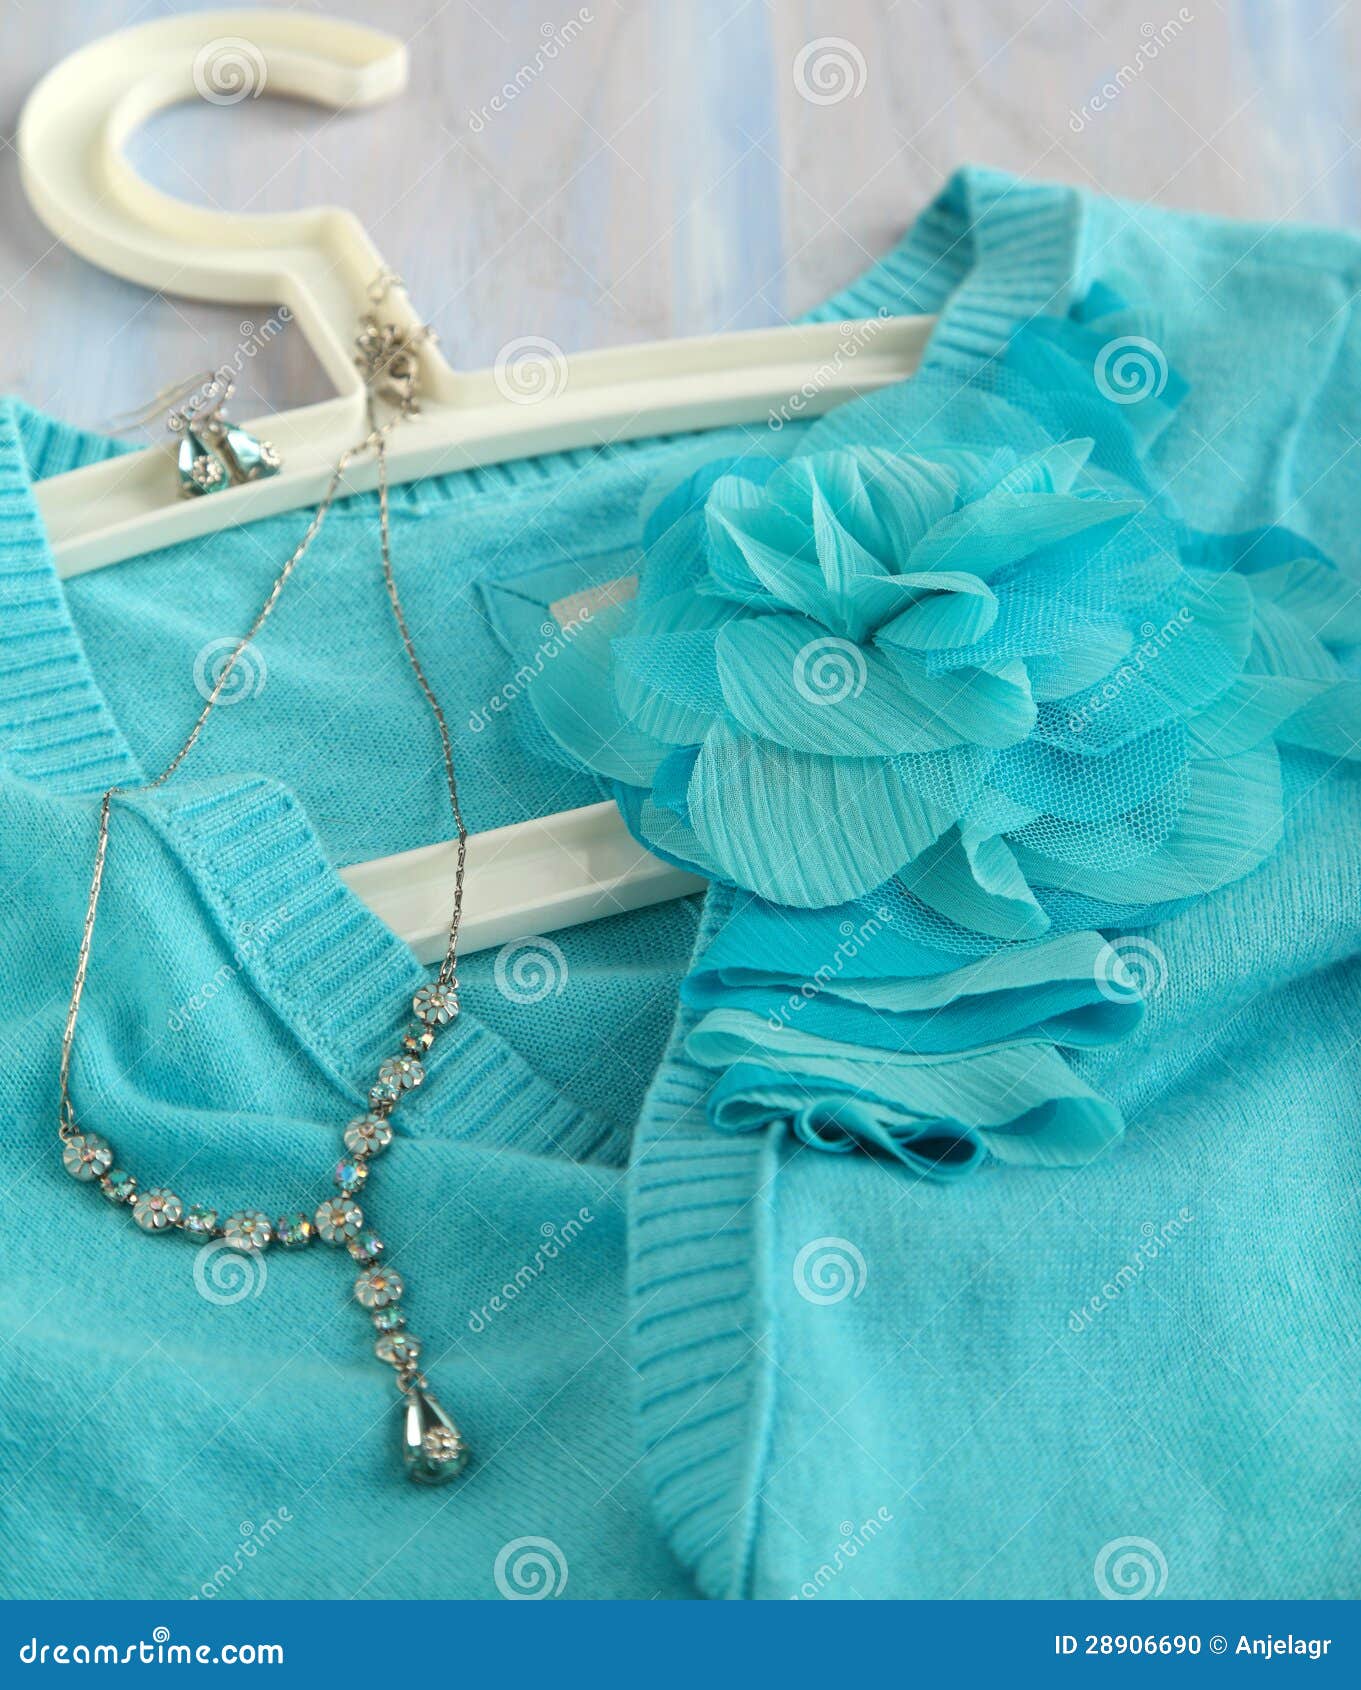 Blue Woman S Knitted Blouse with Decoration Flower Stock Photo - Image ...